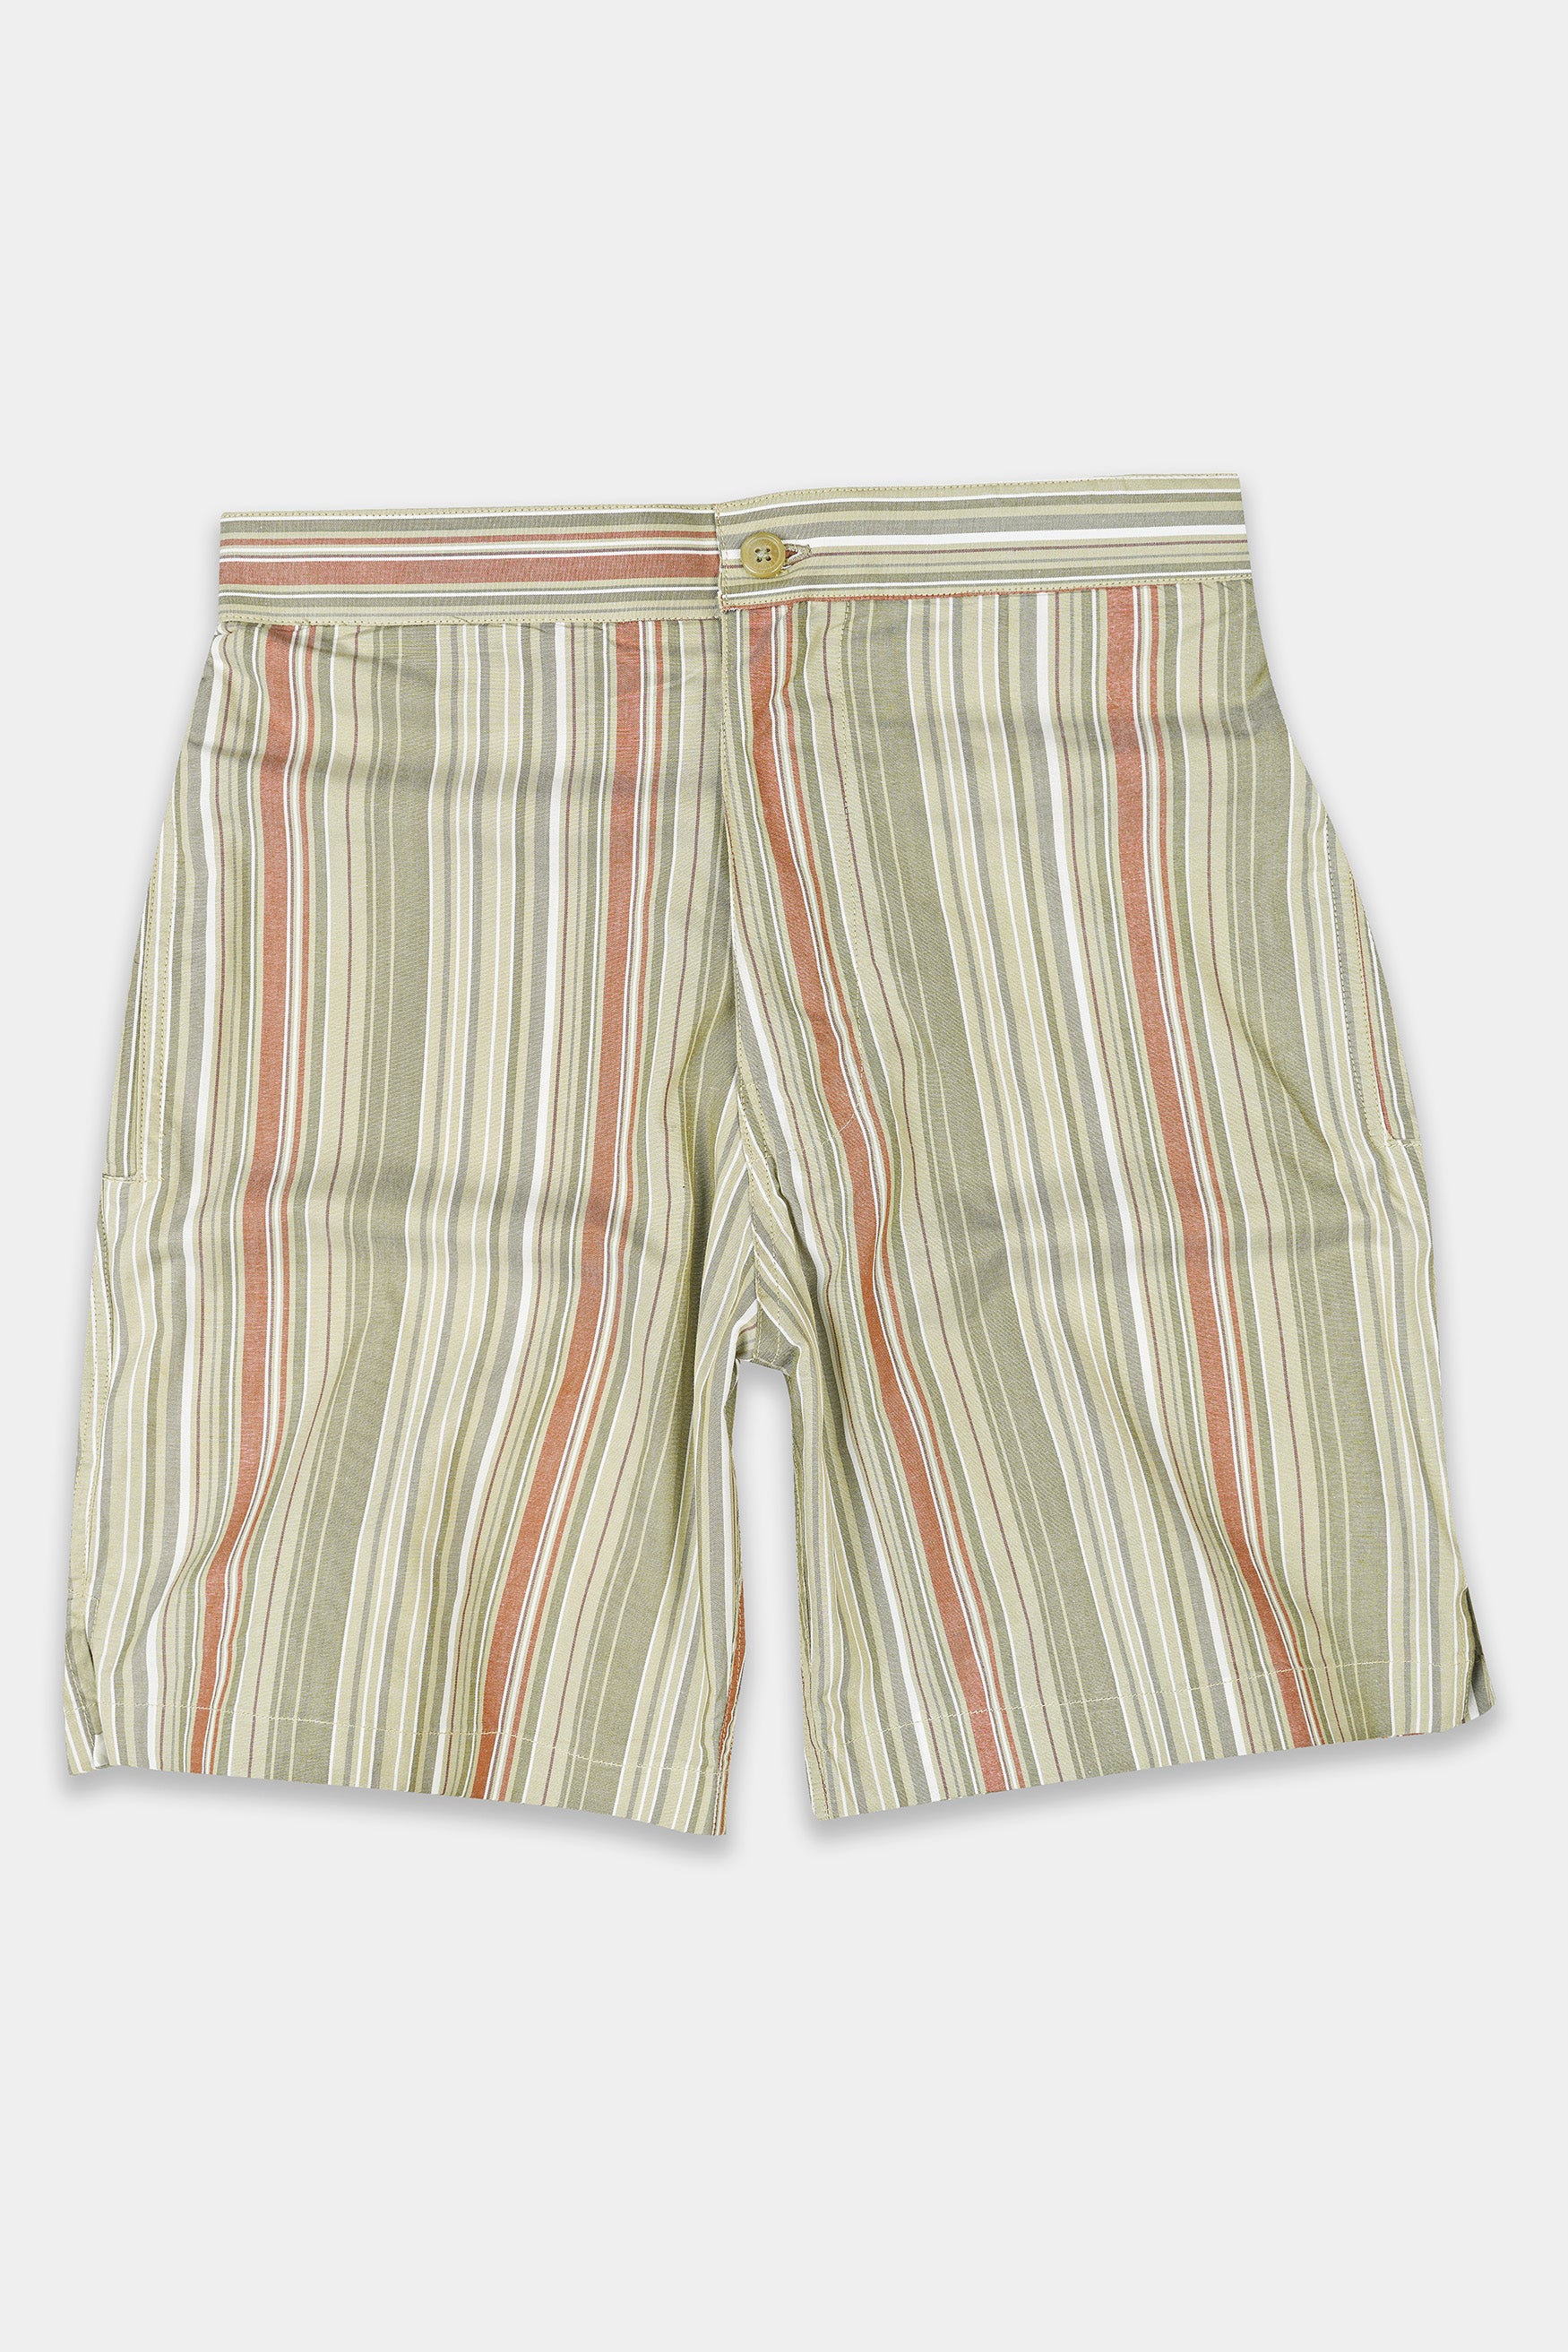 Tallow Brown with Tawny orange Multicolor Striped Chambray Shorts SR348-28,  SR348-30,  SR348-32,  SR348-34,  SR348-36,  SR348-38,  SR348-40,  SR348-42,  SR348-44